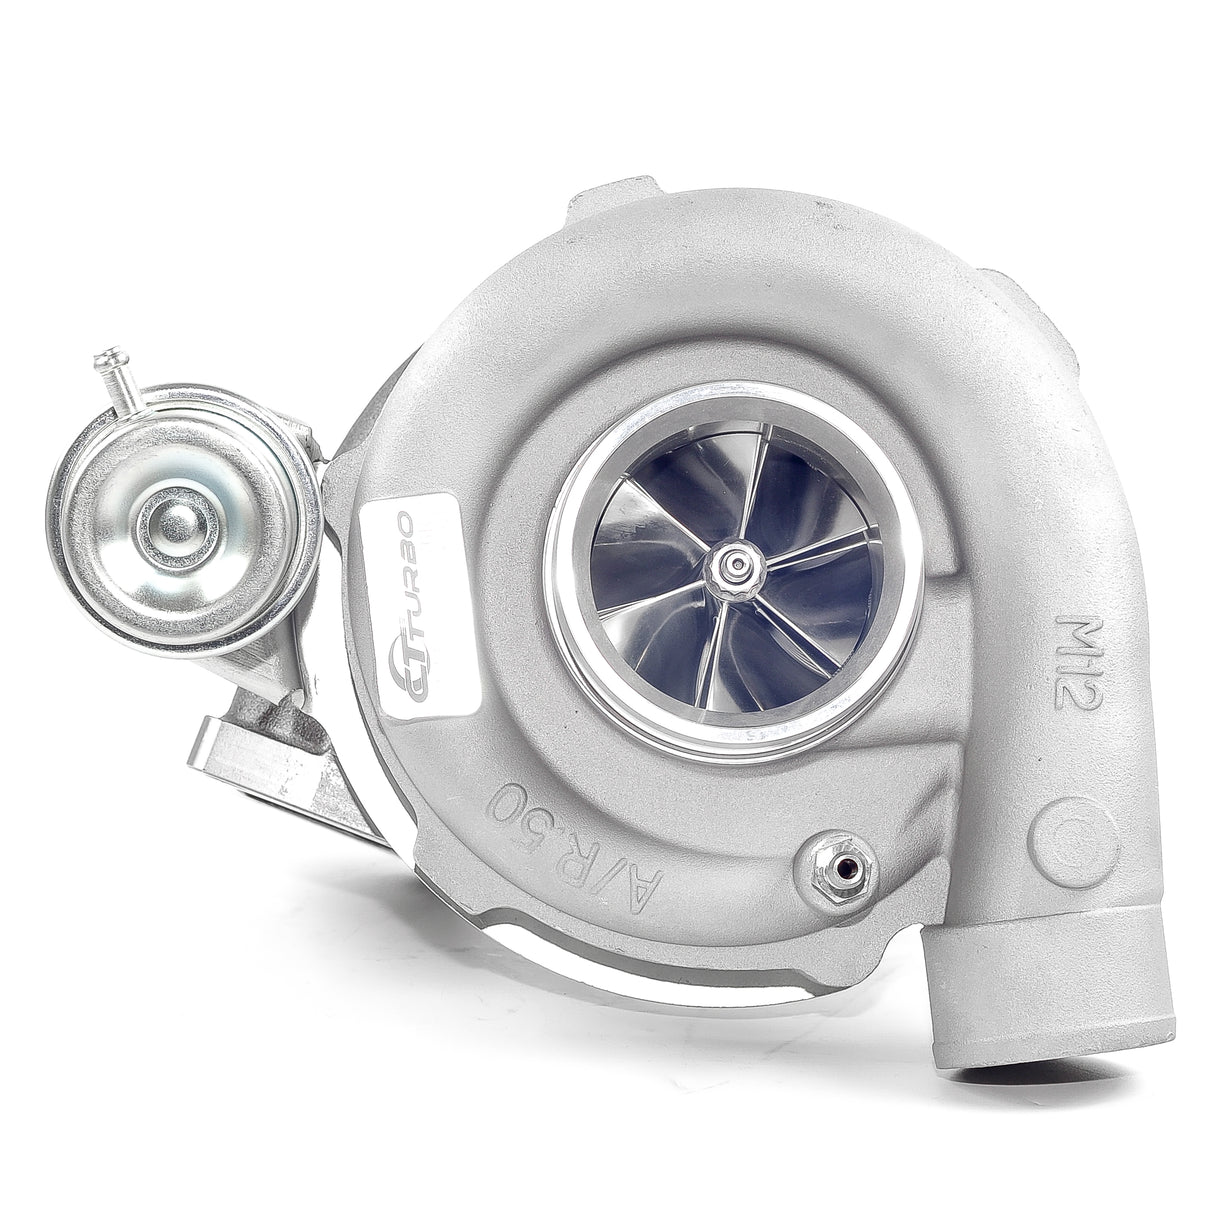 CCT Turbocharger To Suit Ford Falcon FG Barra 4.0L GT3576RS Dual Ball Bearing